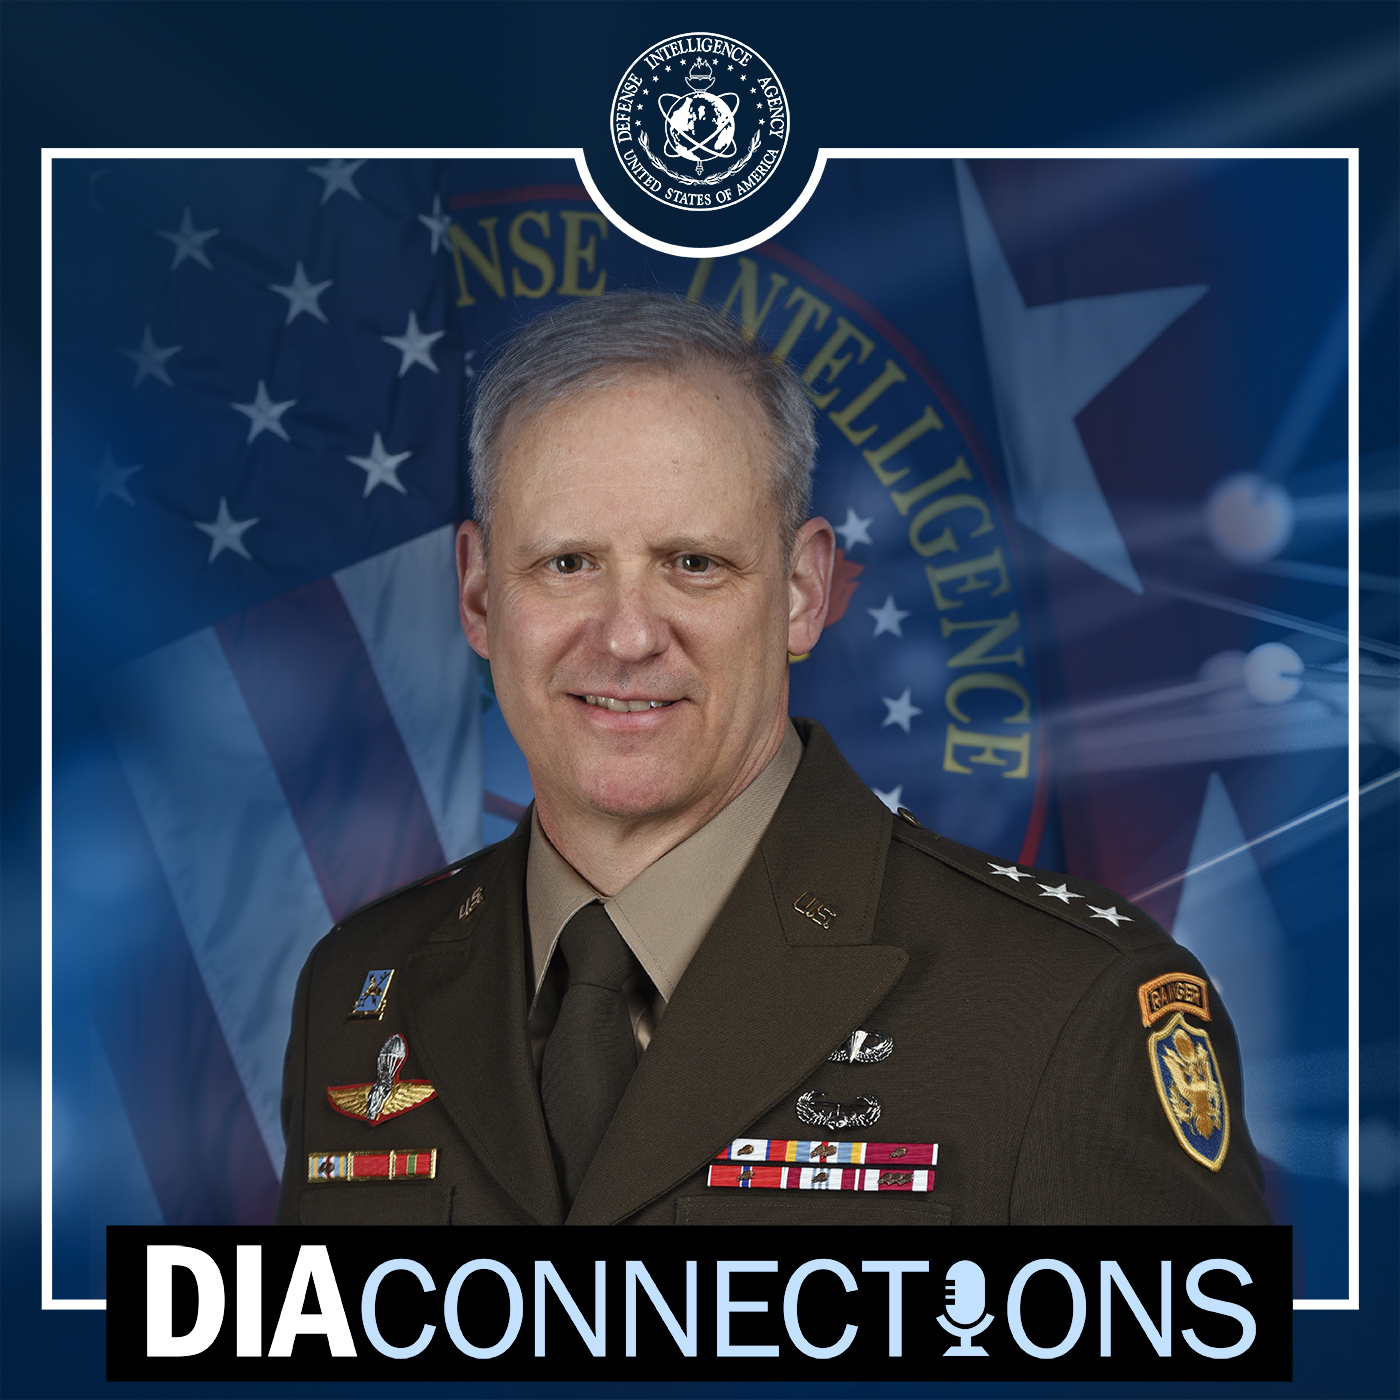 Image of a uniformed member with title. D-I-A Connections.